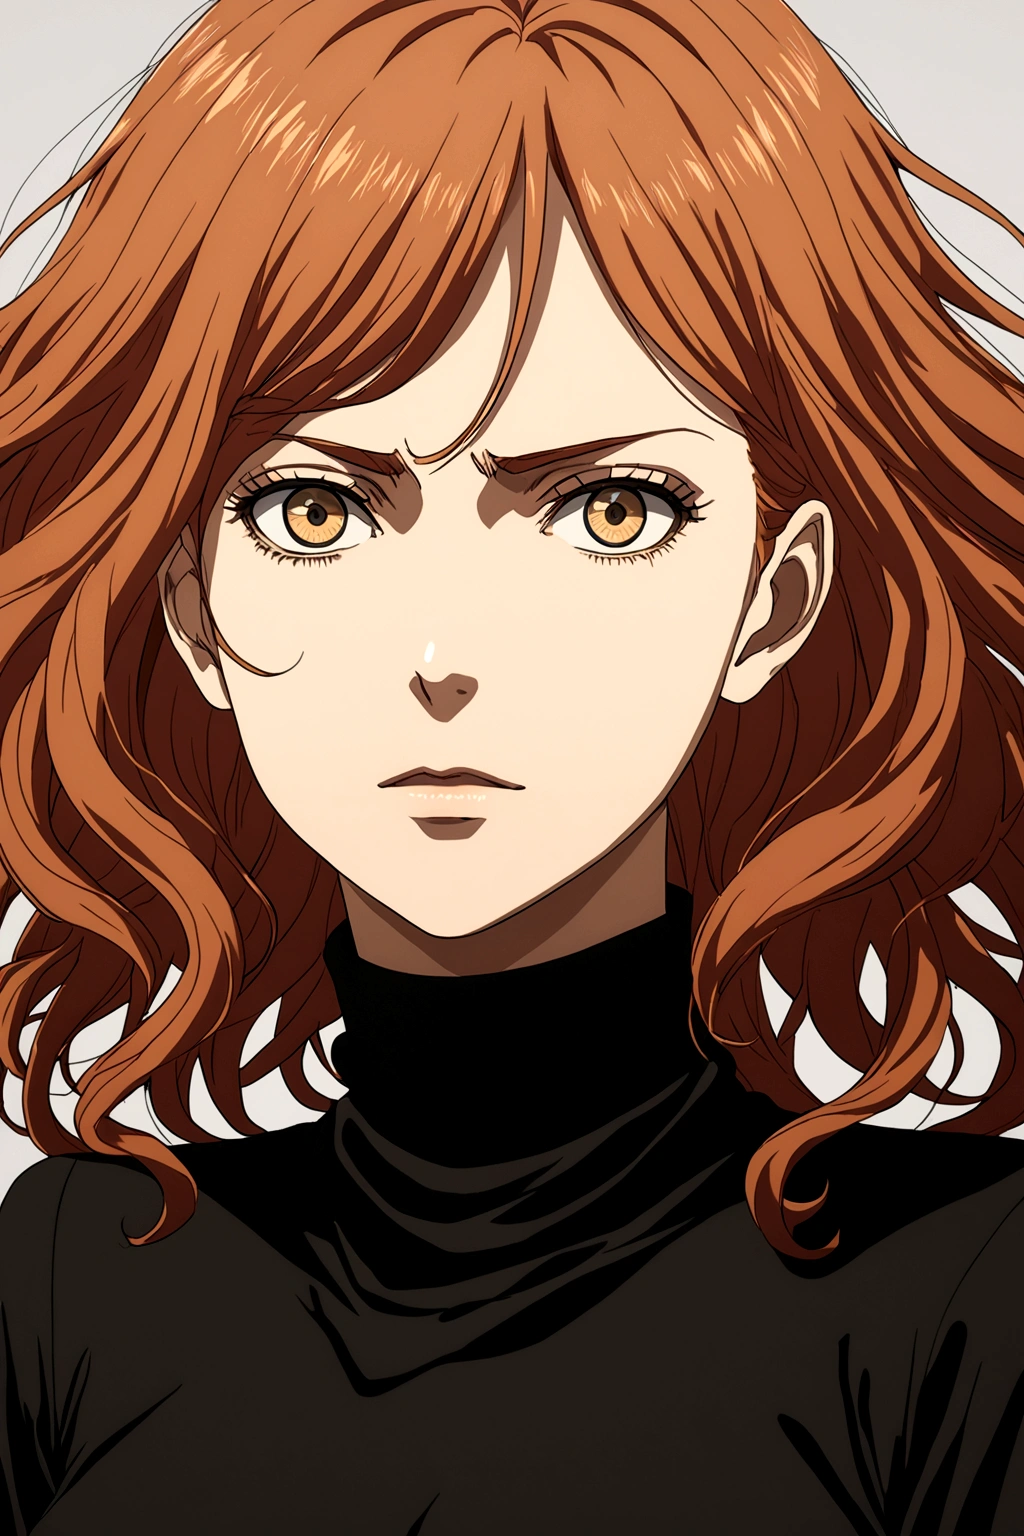 Attack on Titan anime style, woman with ginger wavy hair. She wears a black high-necked blouse